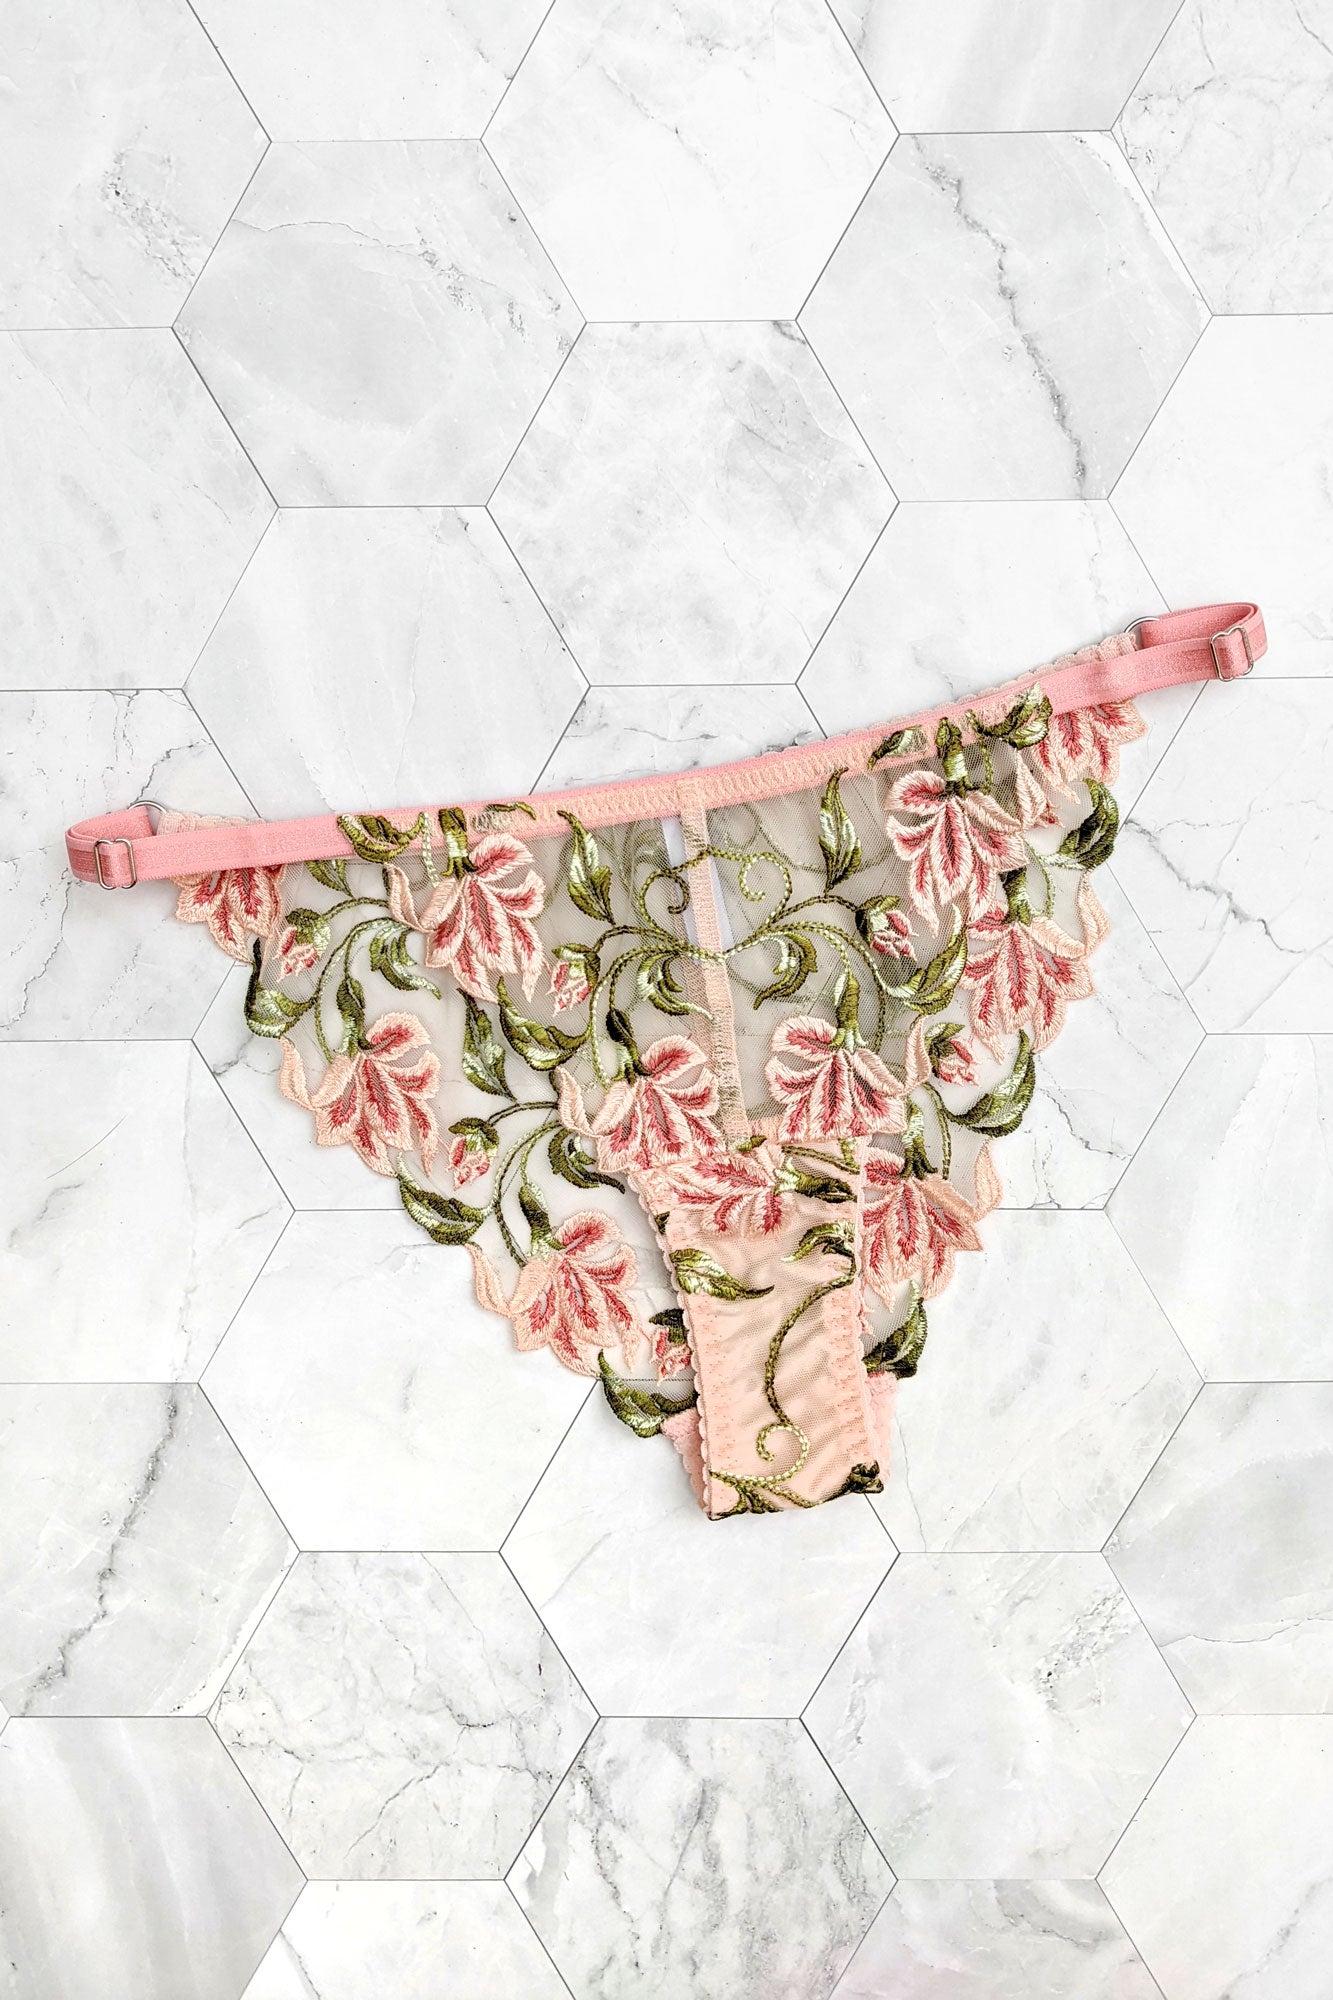 Embroidered panties with pink flowers and green vines